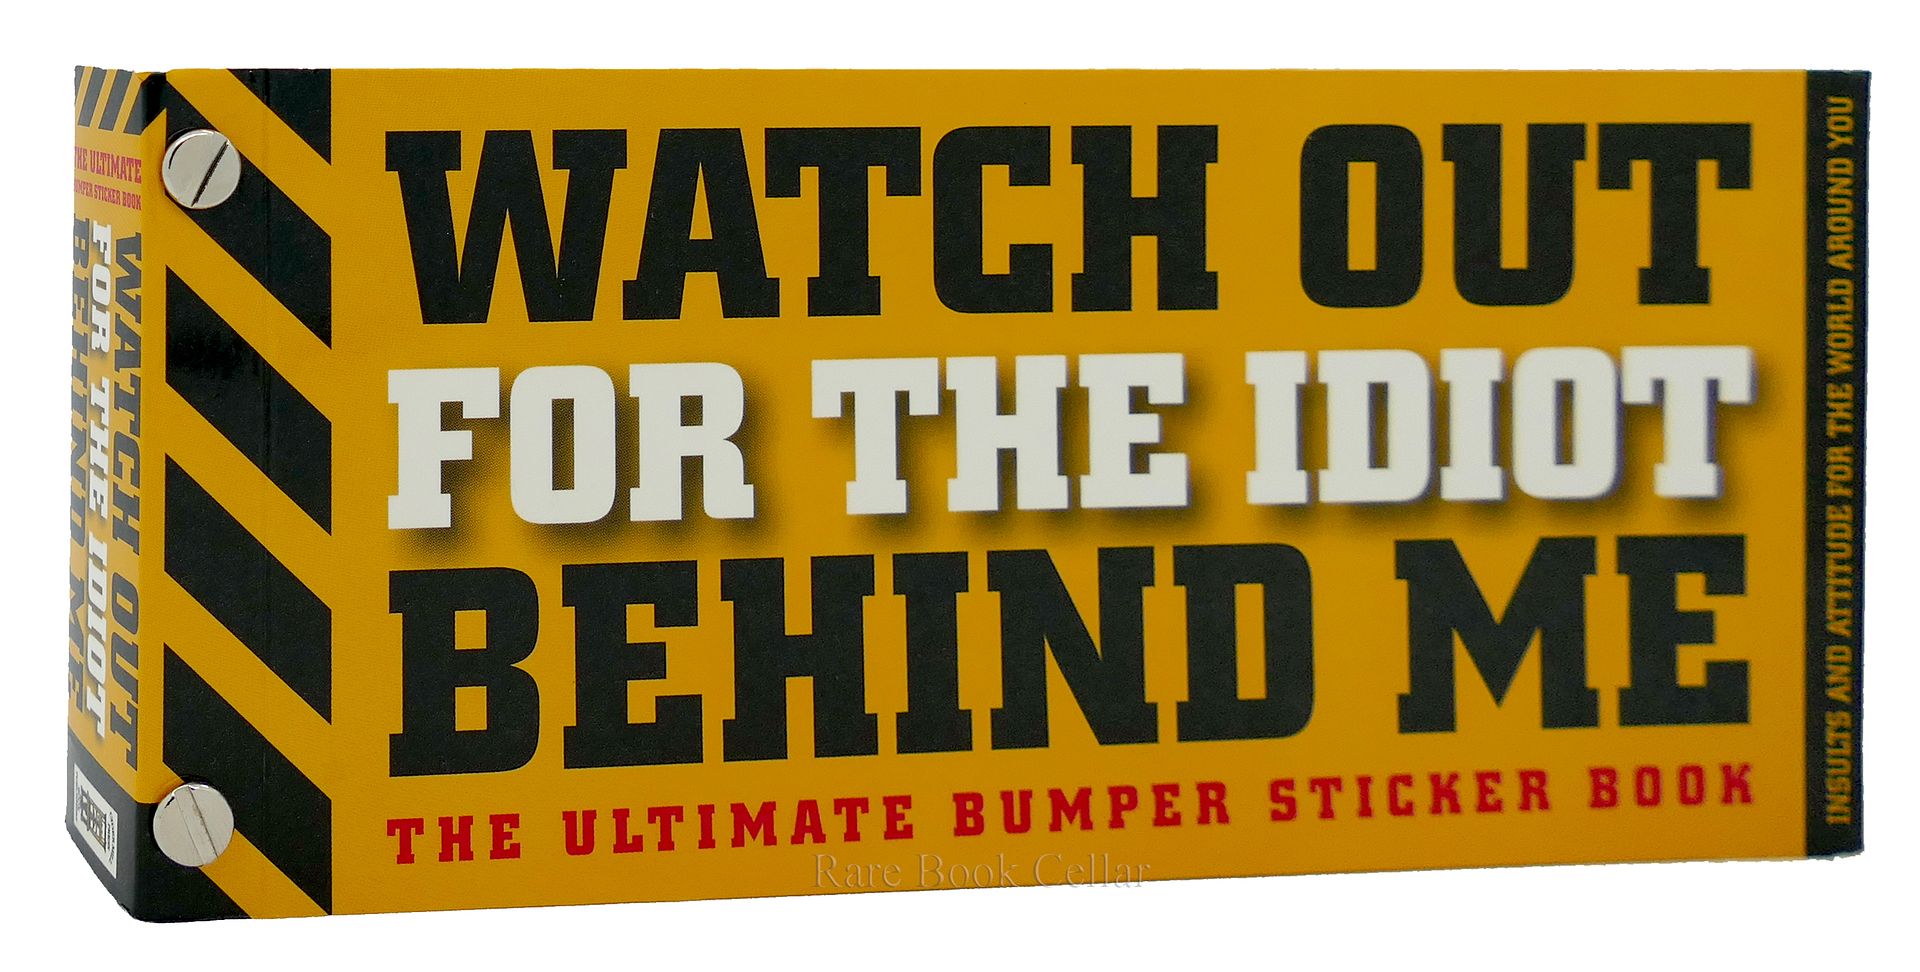  - Watch out for the Idiot Behind Me the Ultimate Bumper Sticker Book